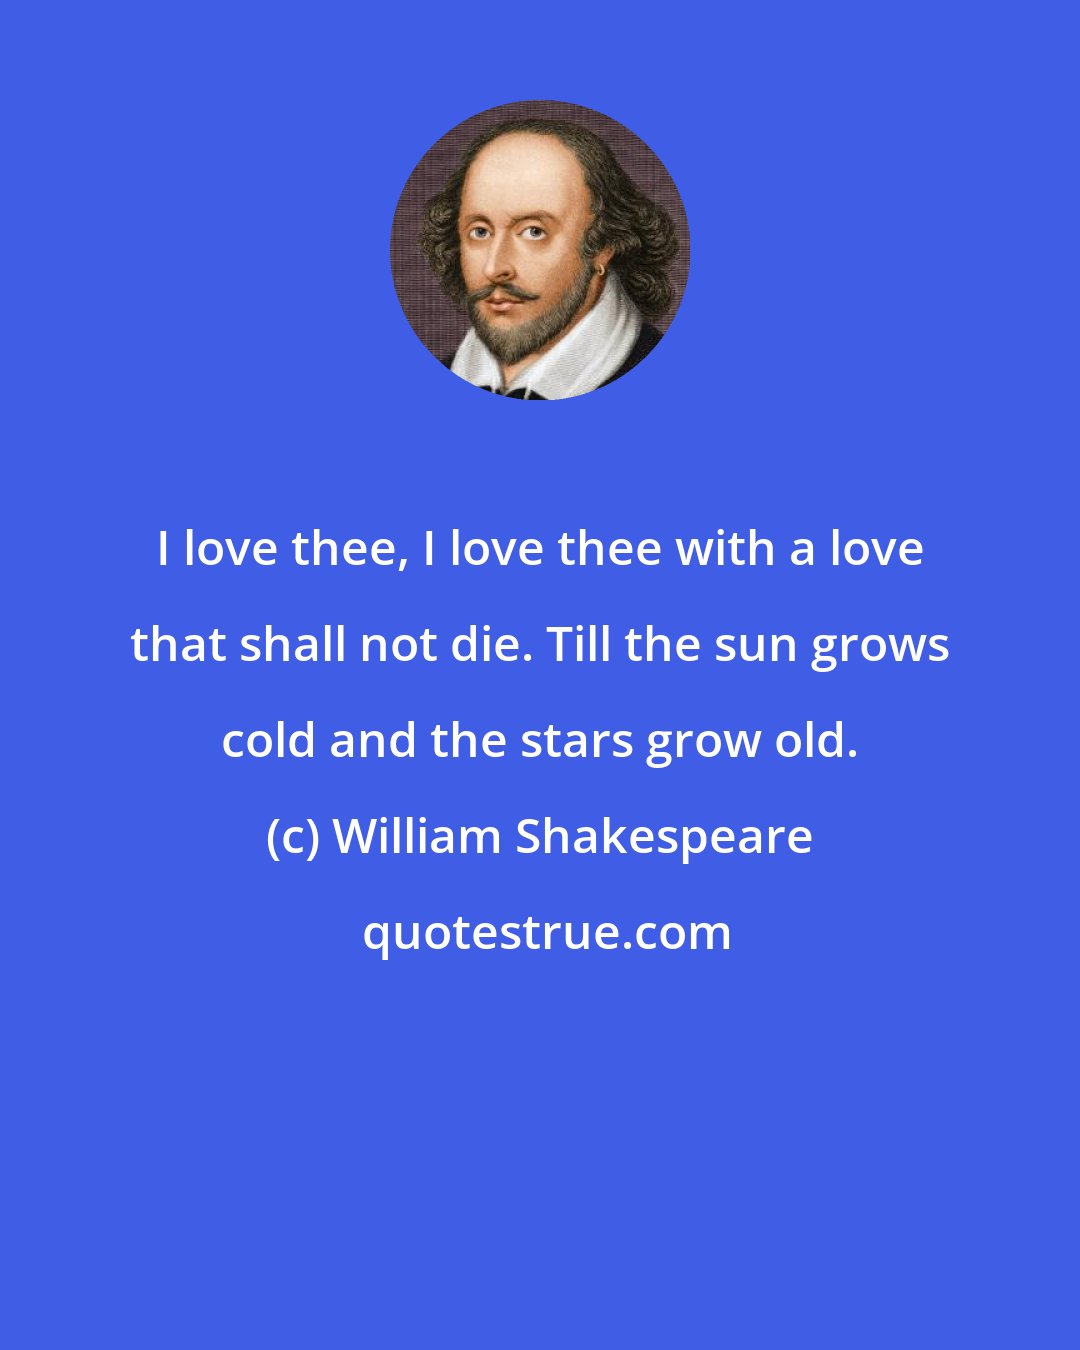 William Shakespeare: I love thee, I love thee with a love that shall not die. Till the sun grows cold and the stars grow old.